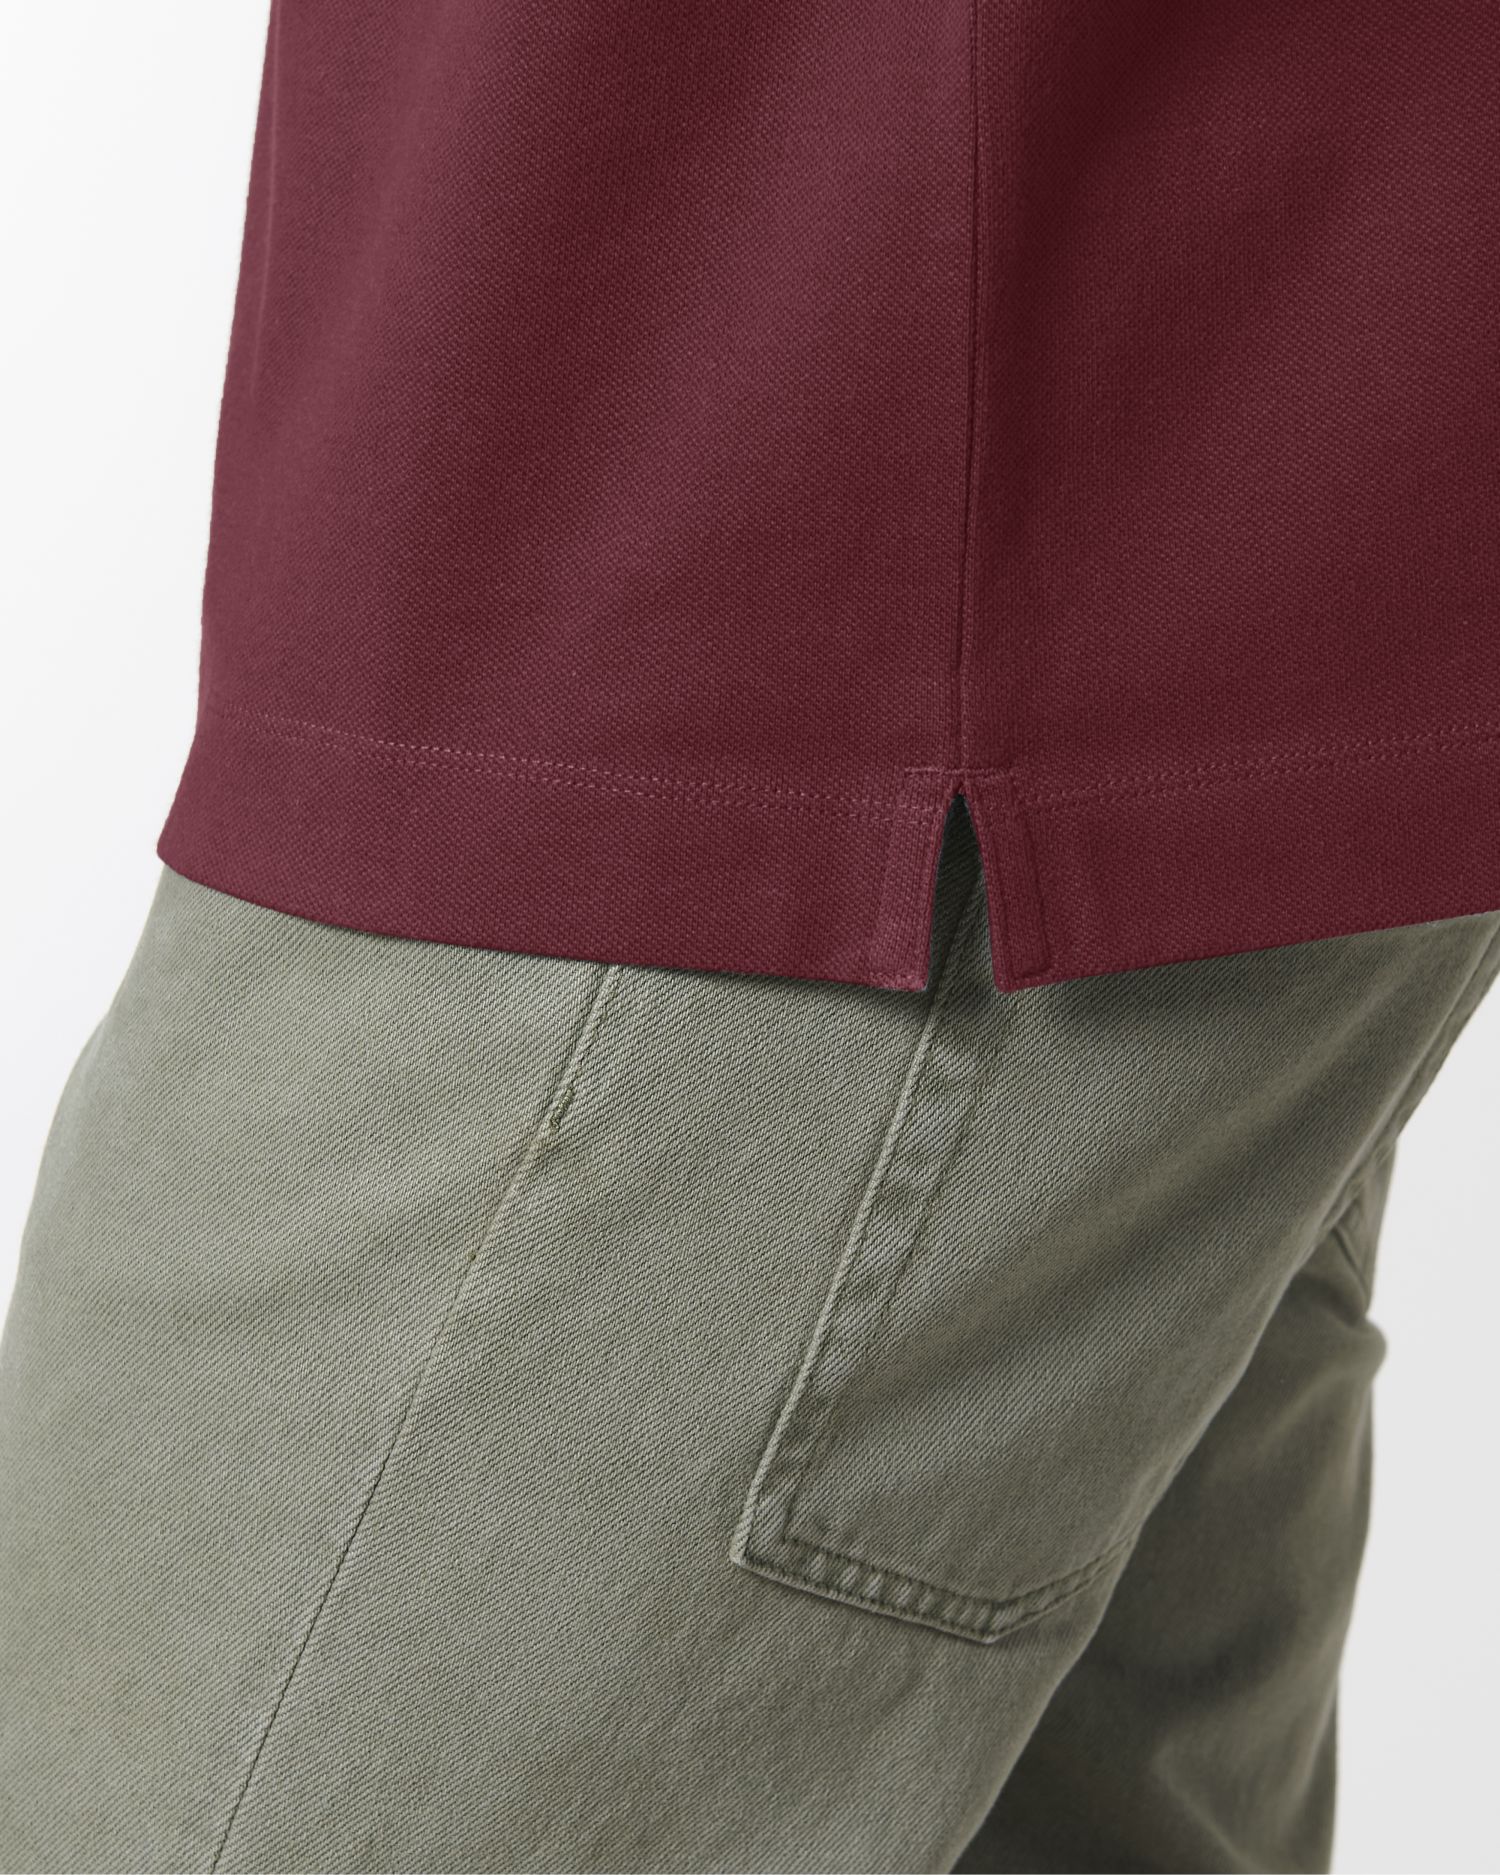  Prepster Long Sleeve in Farbe Burgundy